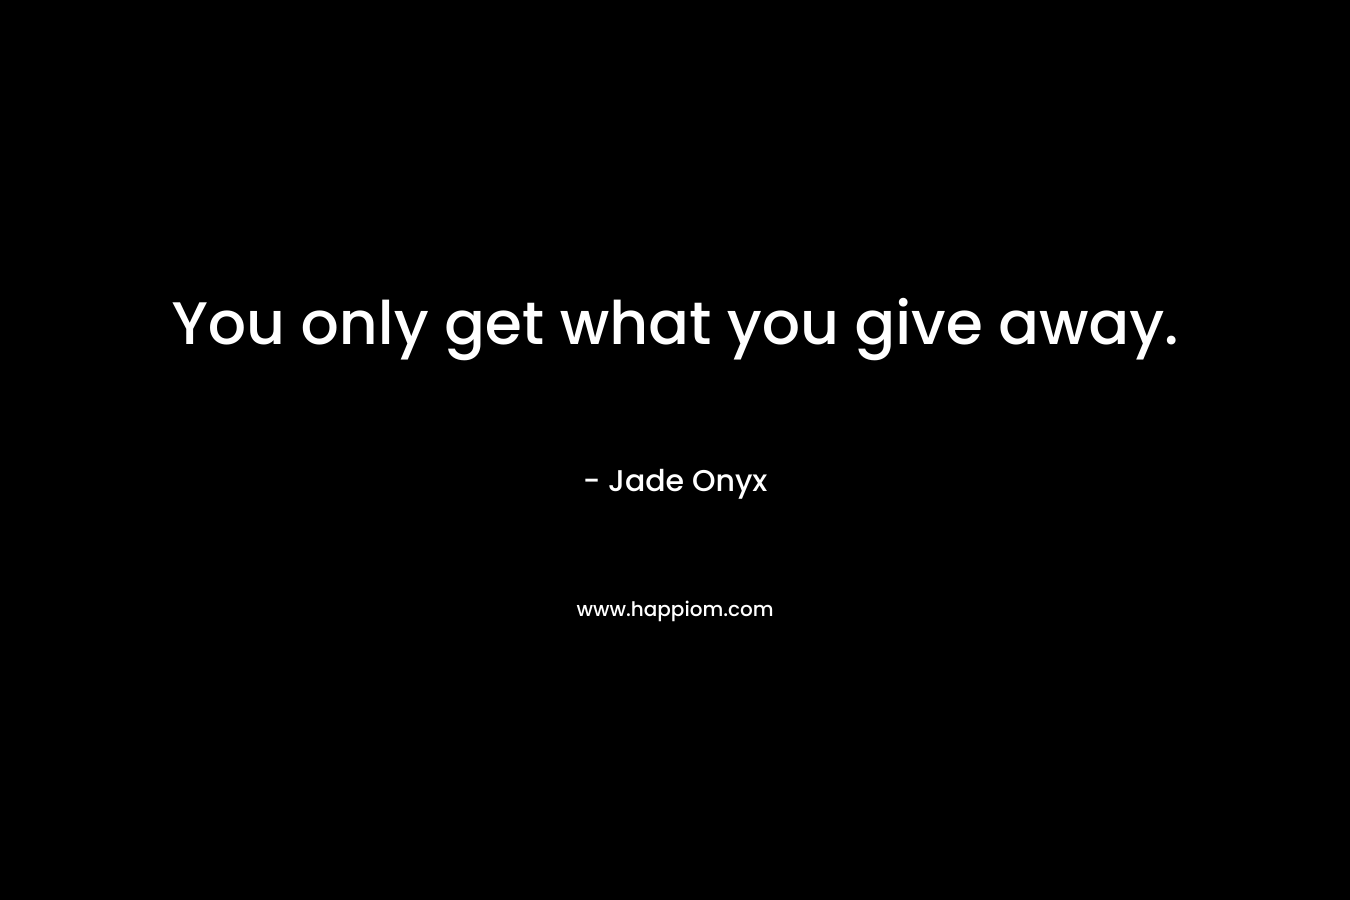 You only get what you give away. – Jade Onyx